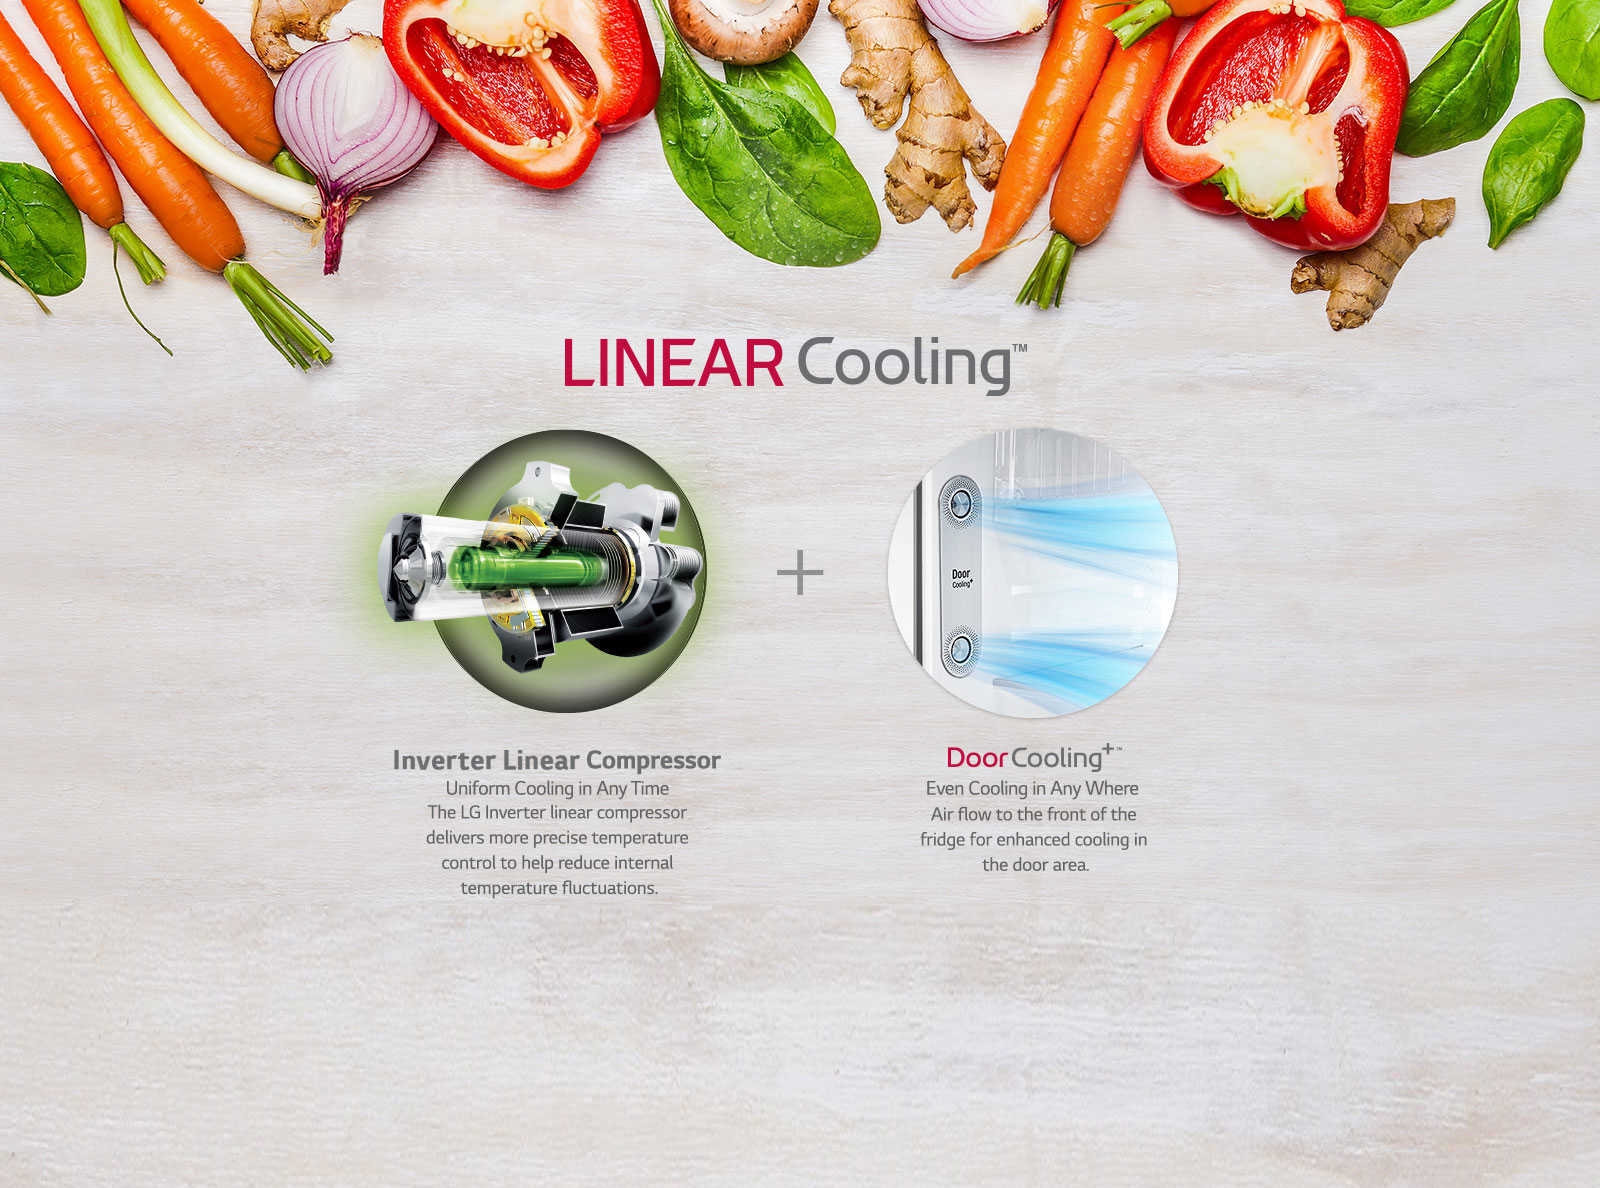 Linear Cooling